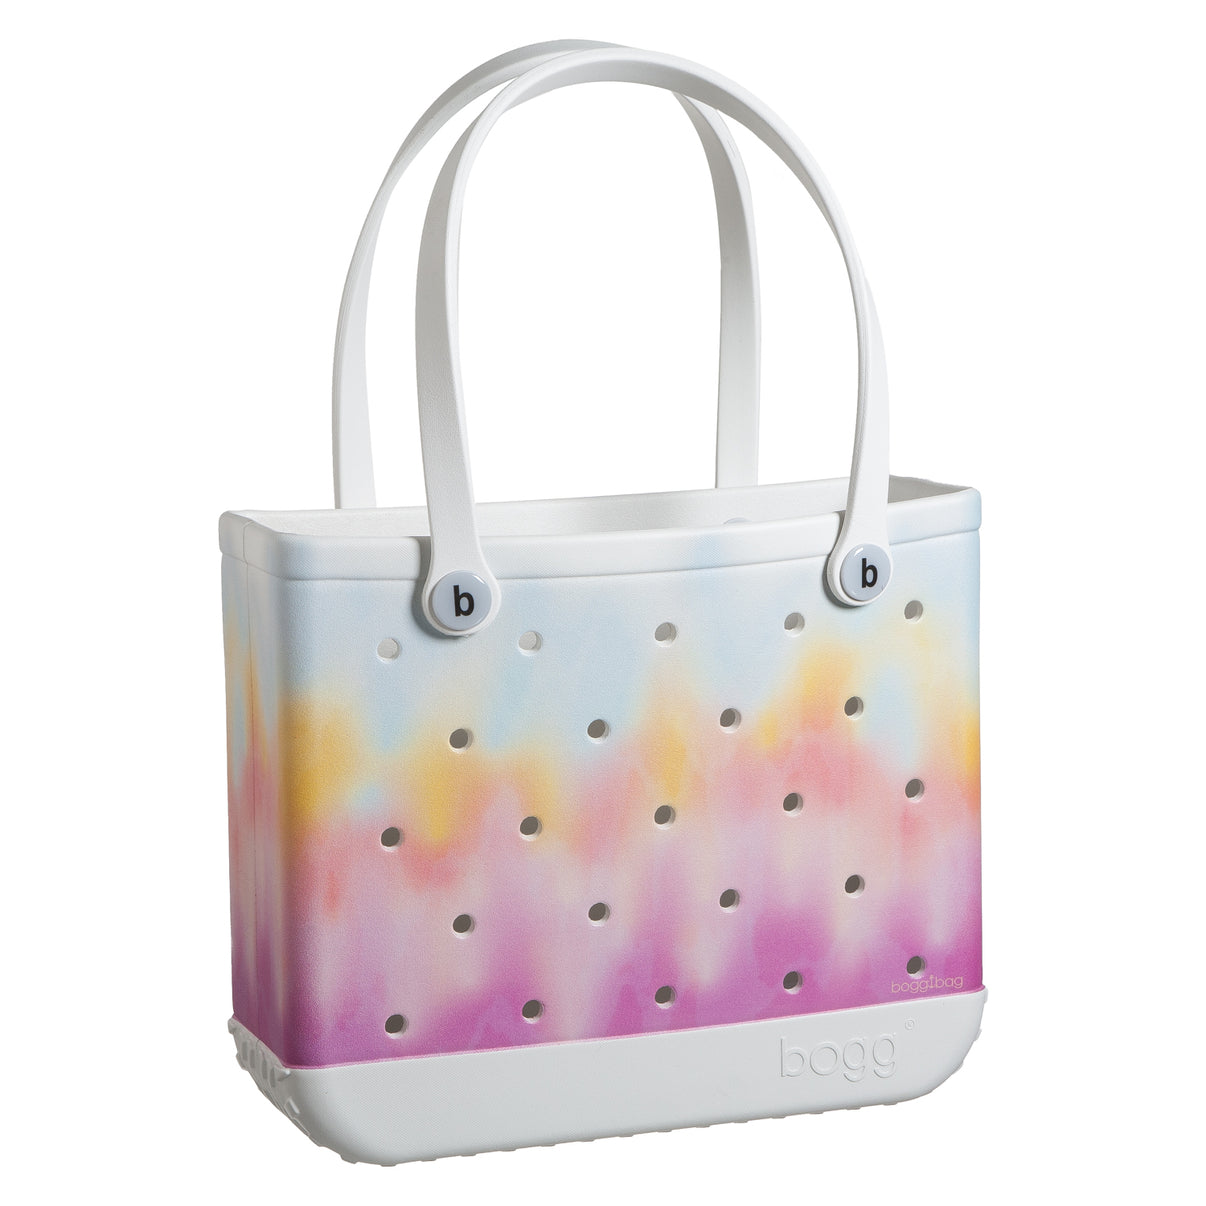 Baby Bogg Bag | Cotton Candy